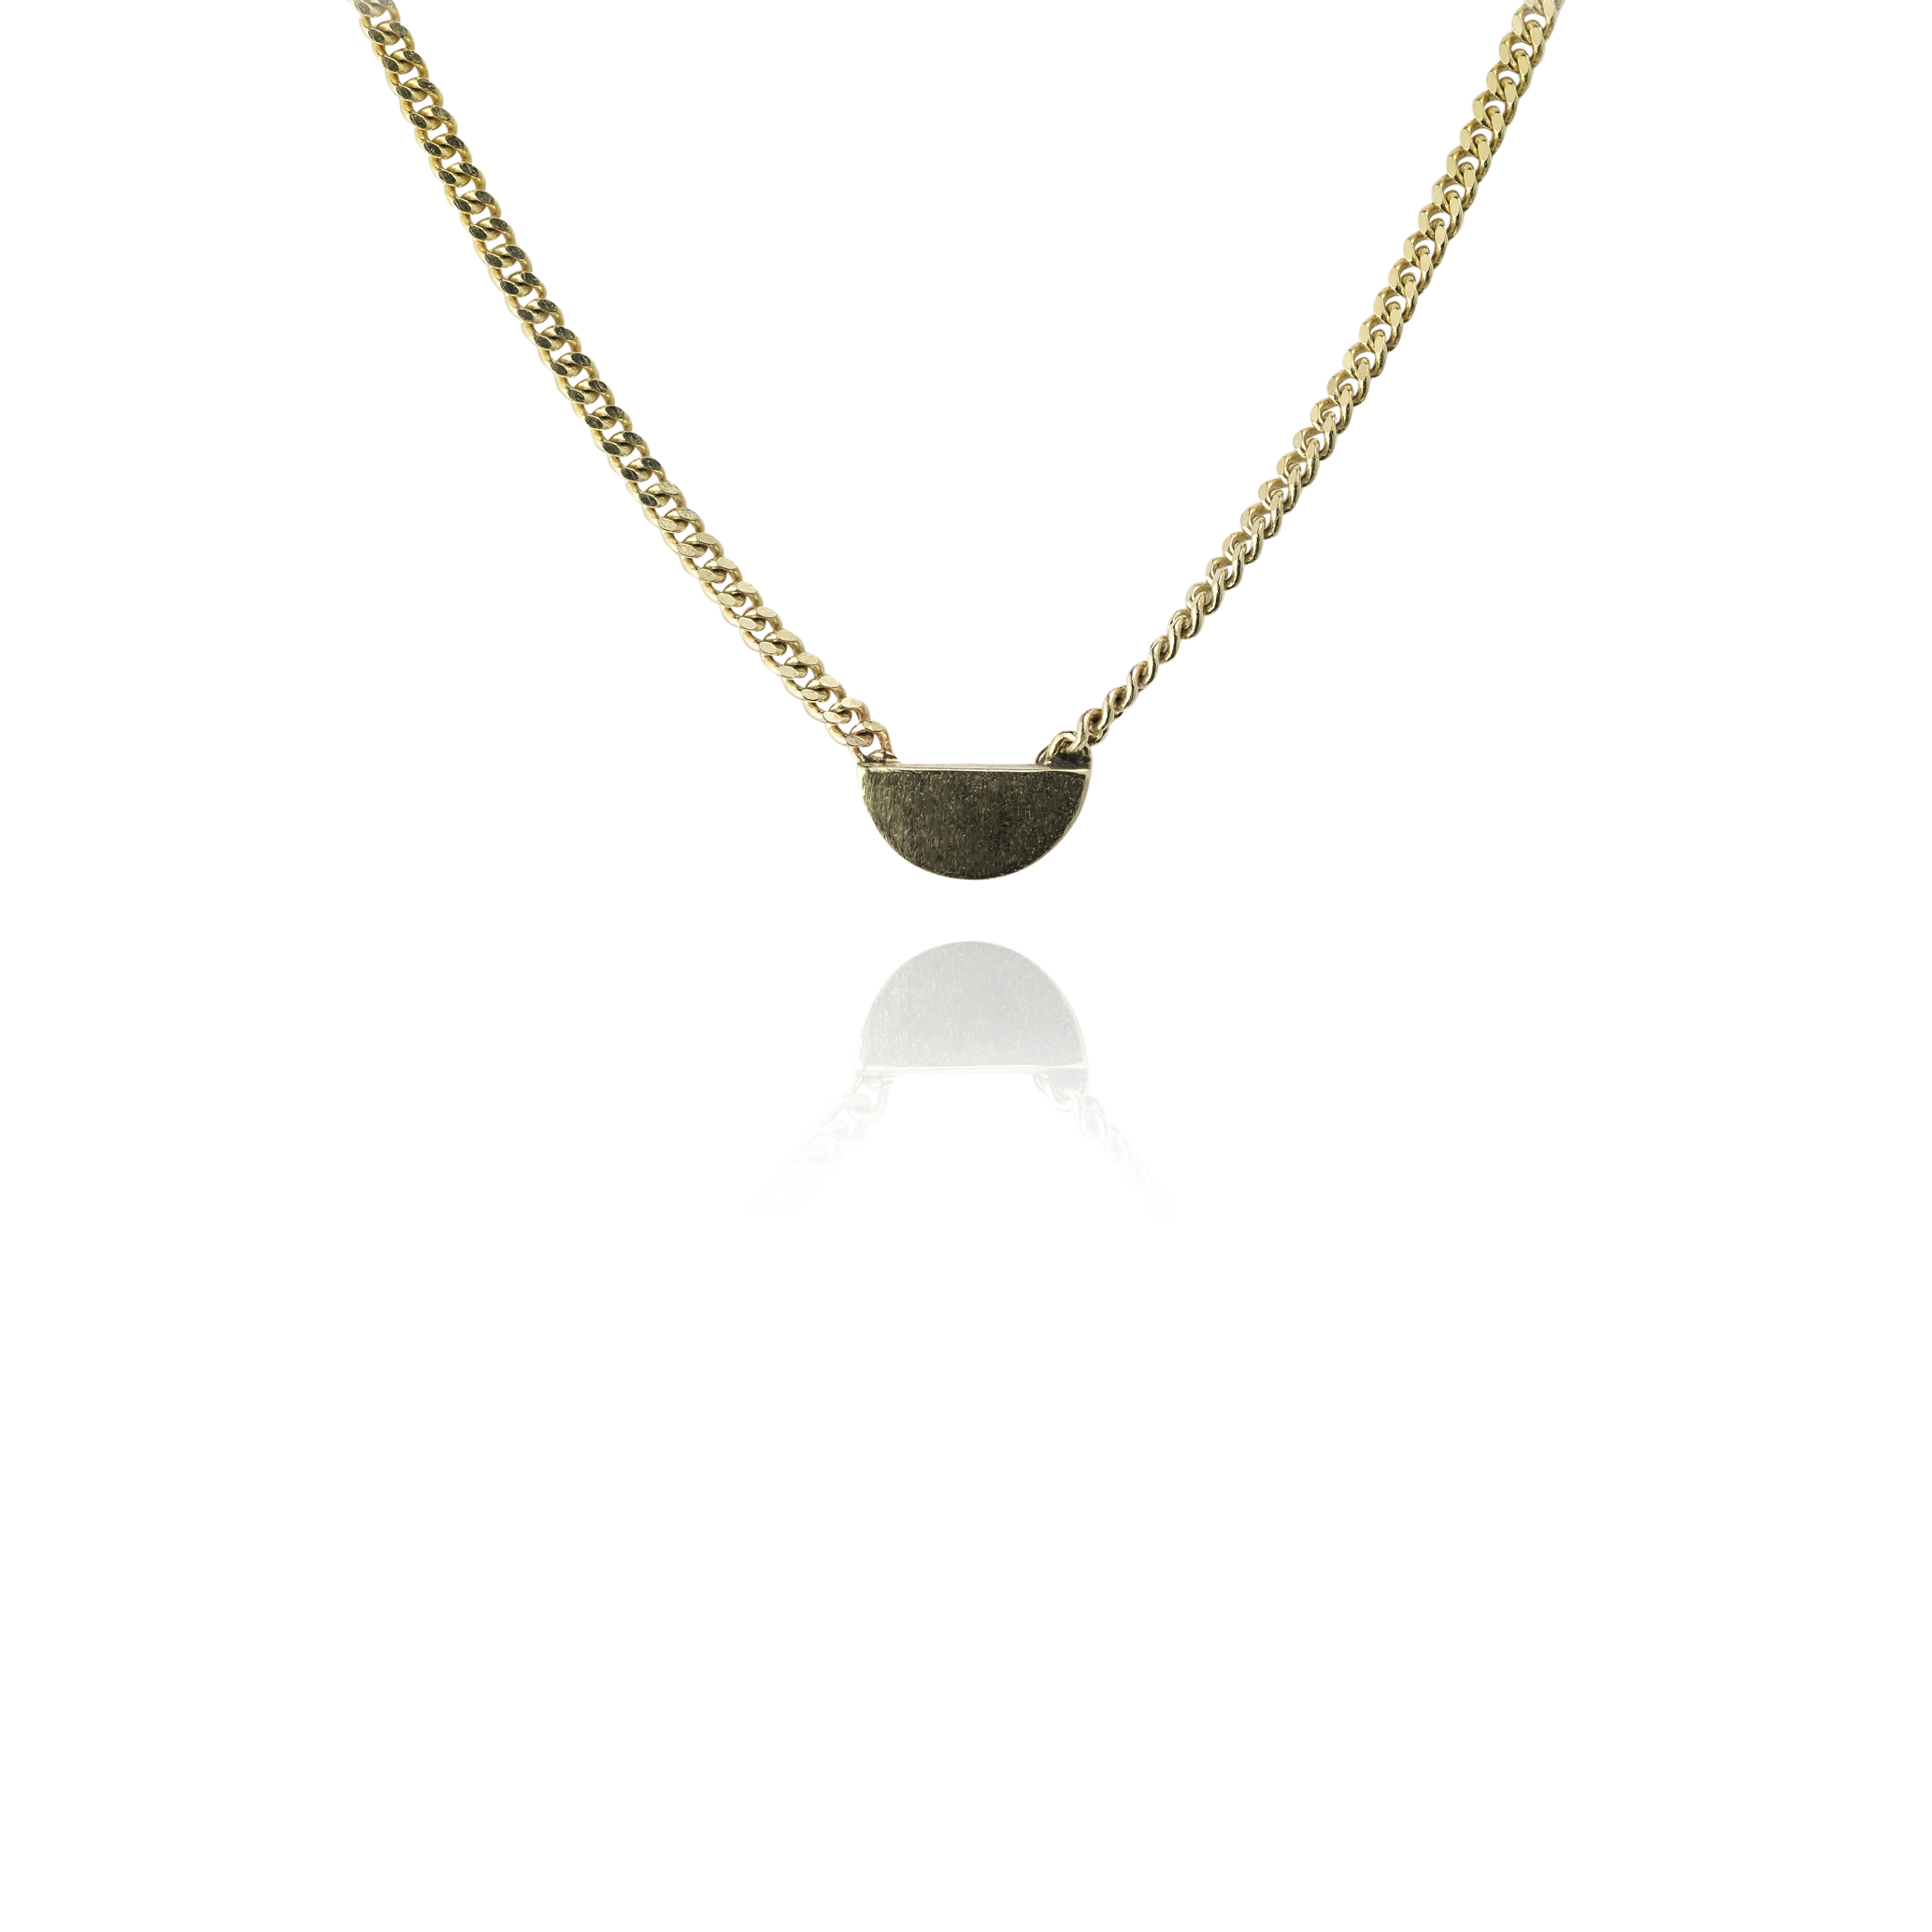 Necklace with half moon